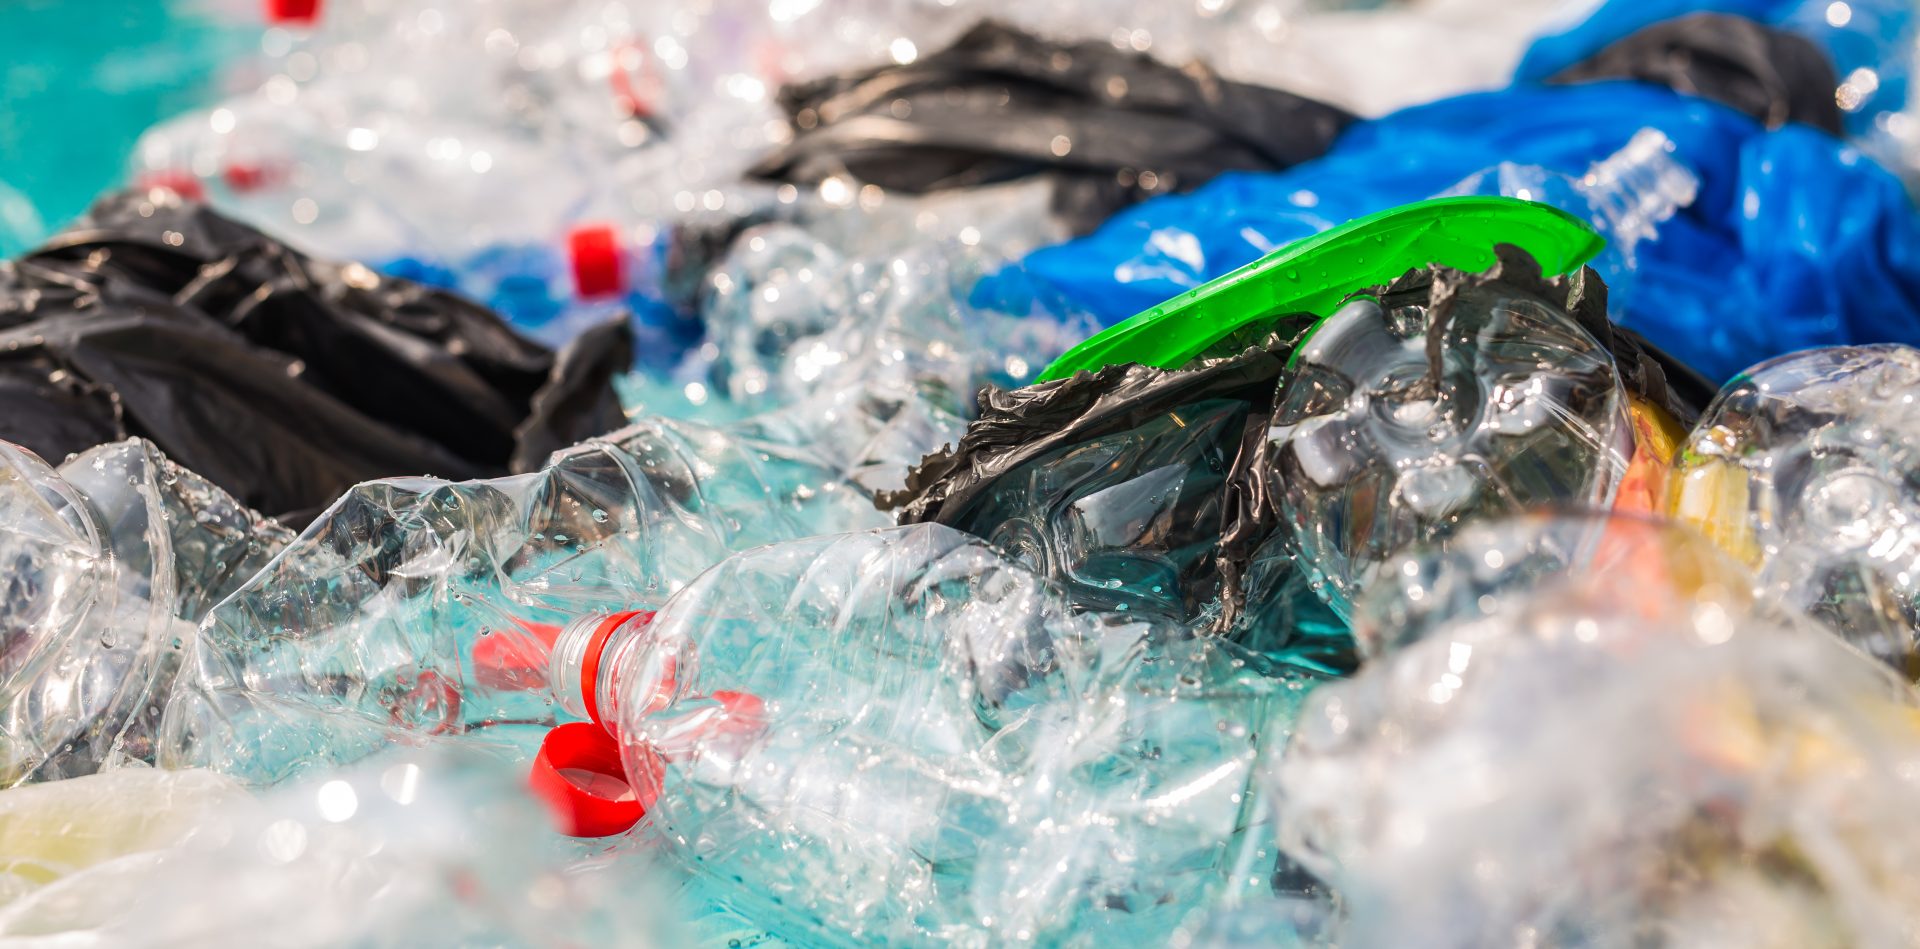 Commentary: Stakes are high for upcoming Global Plastics Treaty negotiations